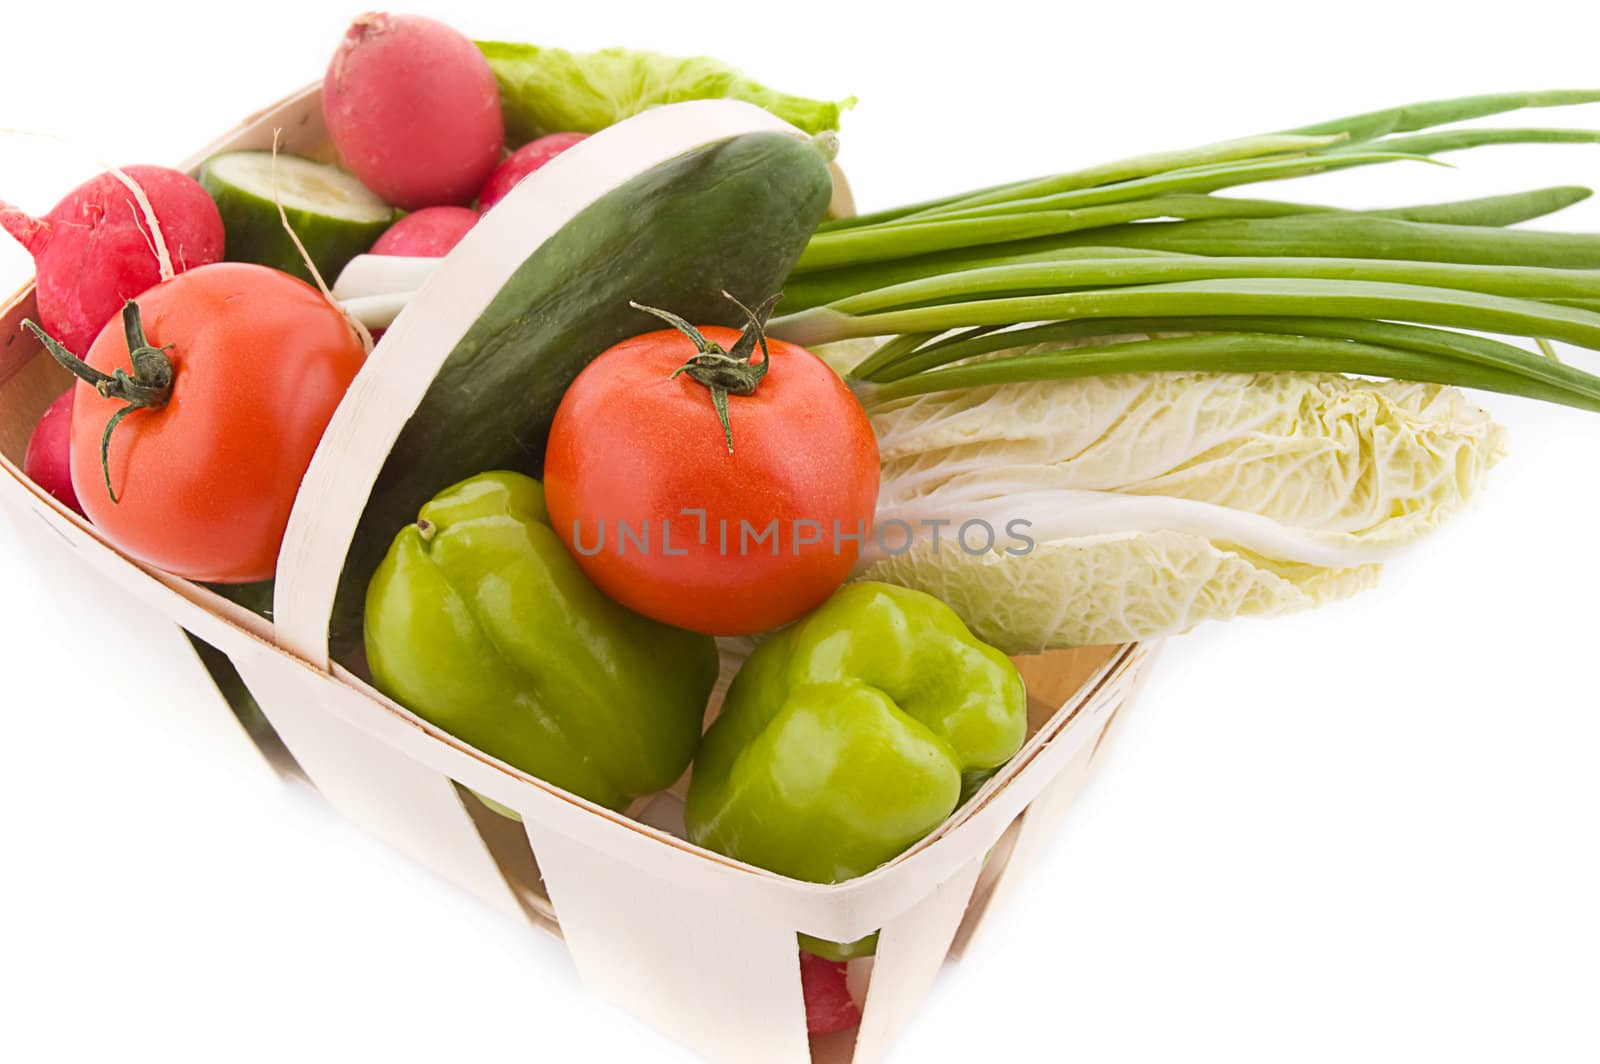 Wattled basket with vegetable by Angel_a